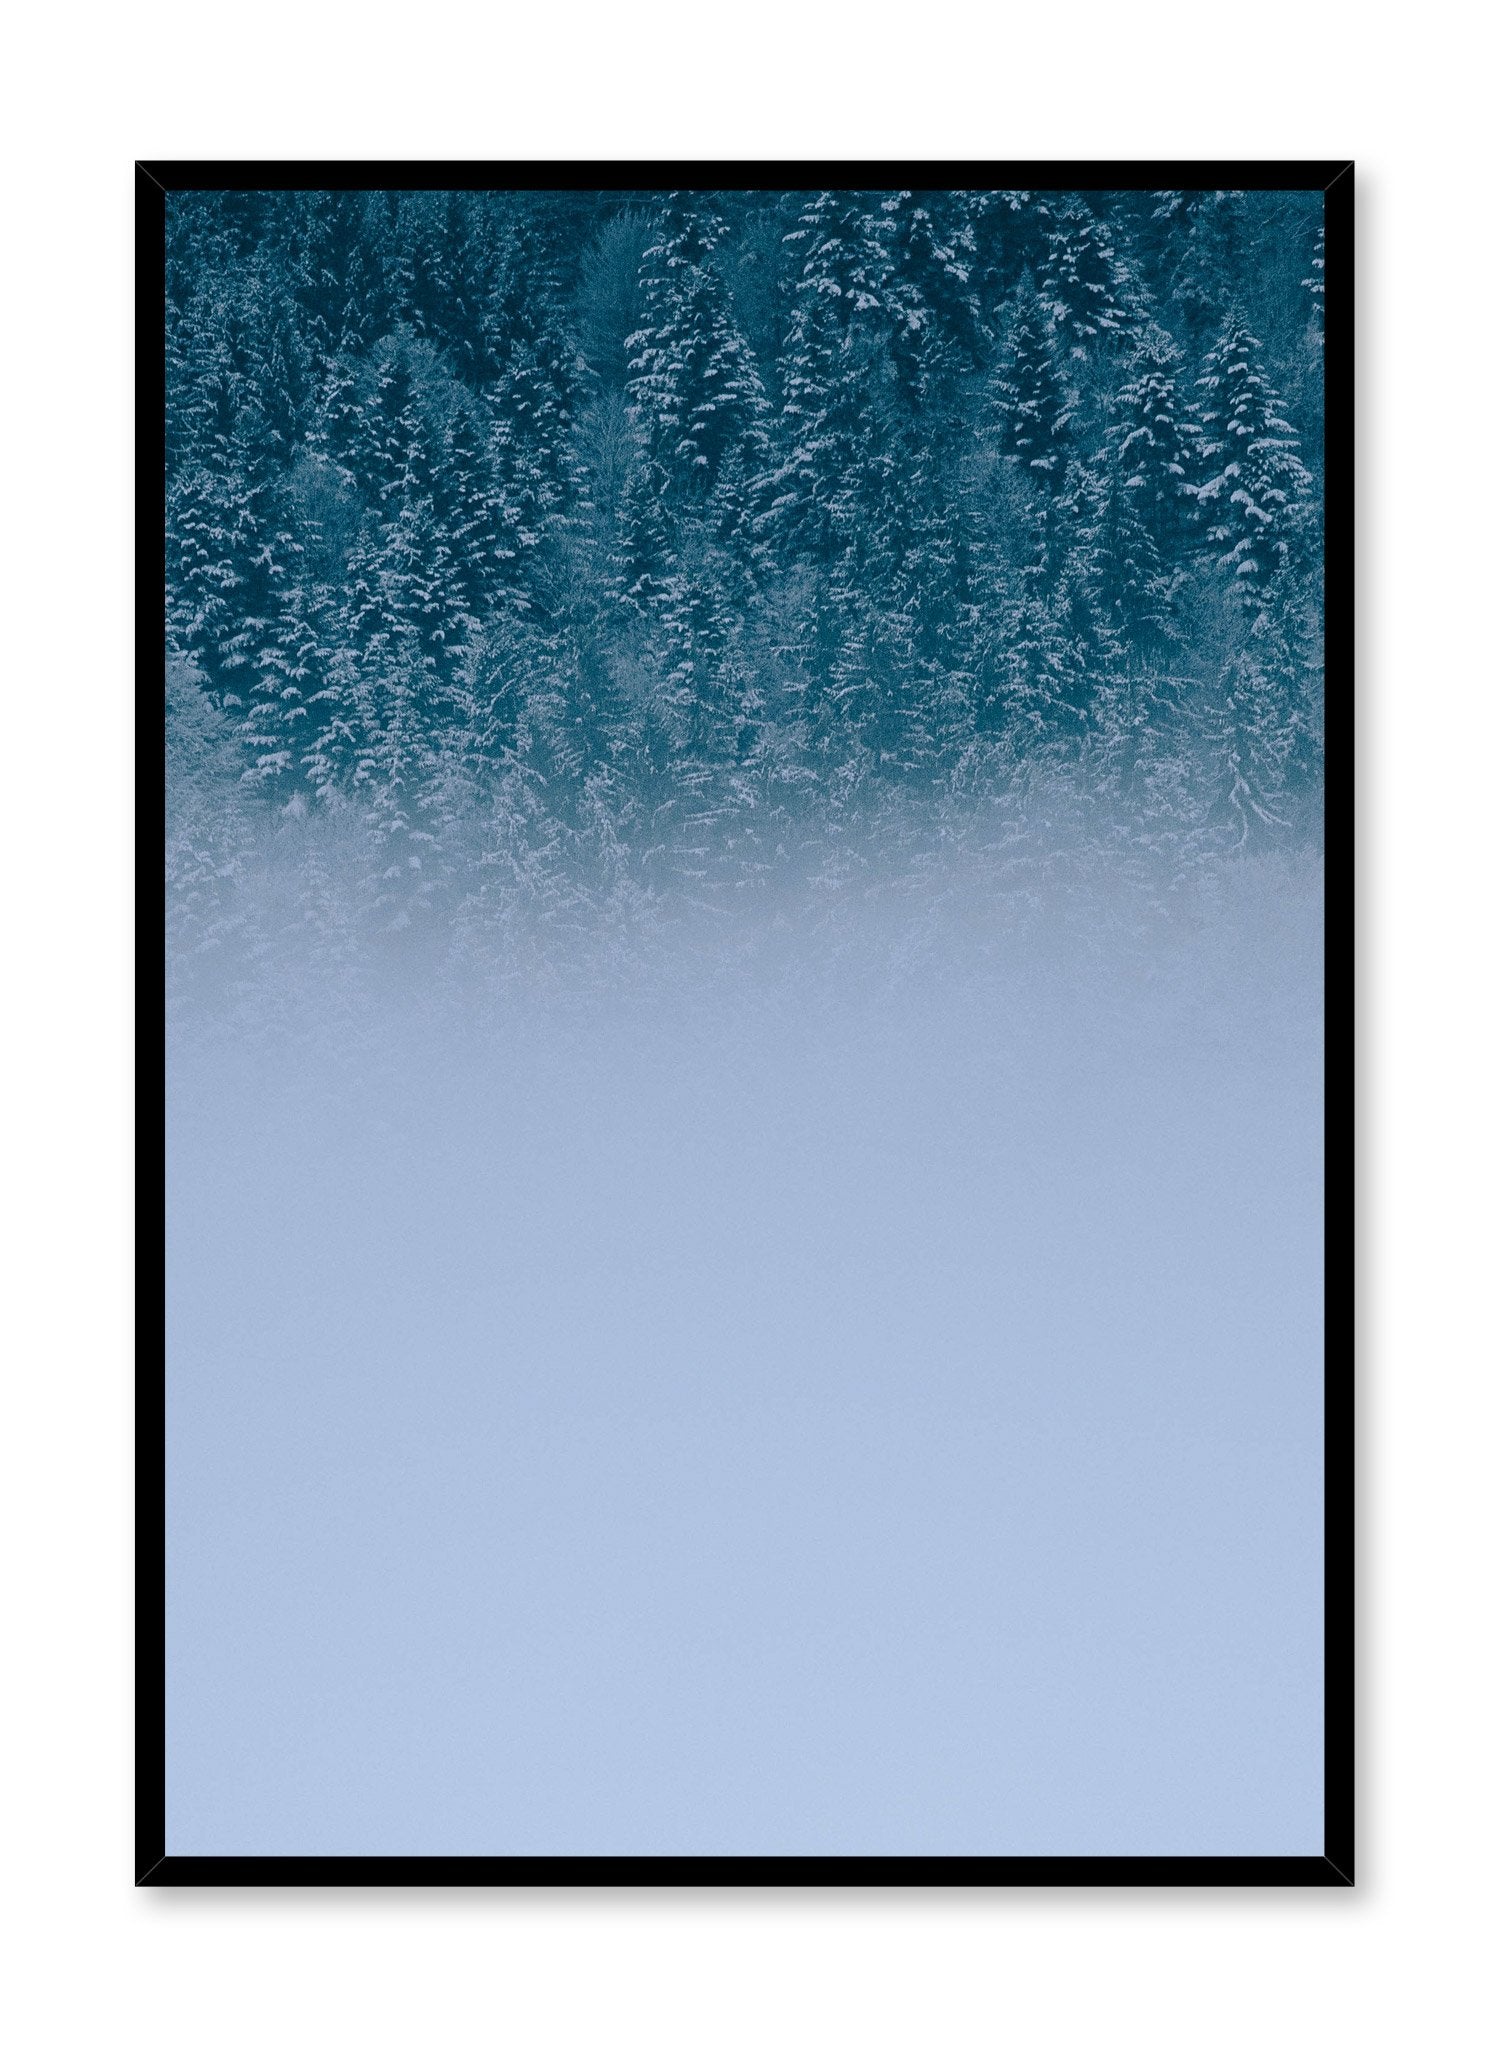 Minimalist design poster by Opposite Wall with misty Winter Forest photography